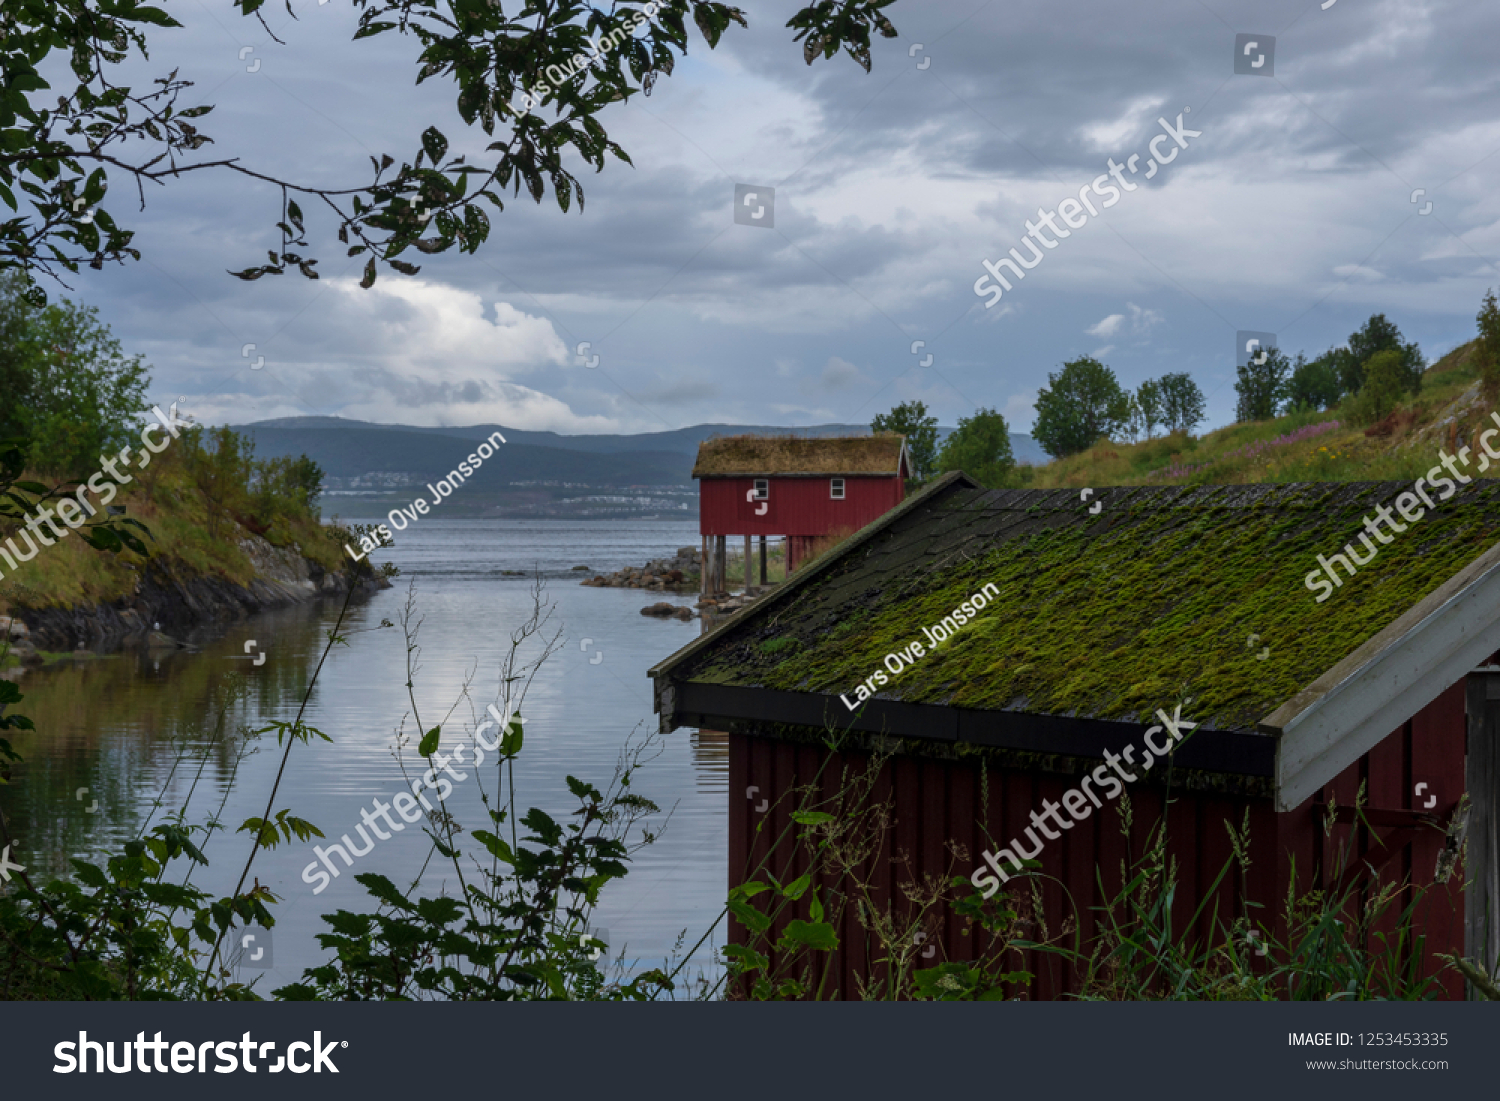 Boathouse in a little bay with calm water with moss on the roof in foreground and a red boathouse in background, picture from the Northern Norway.   #1253453335